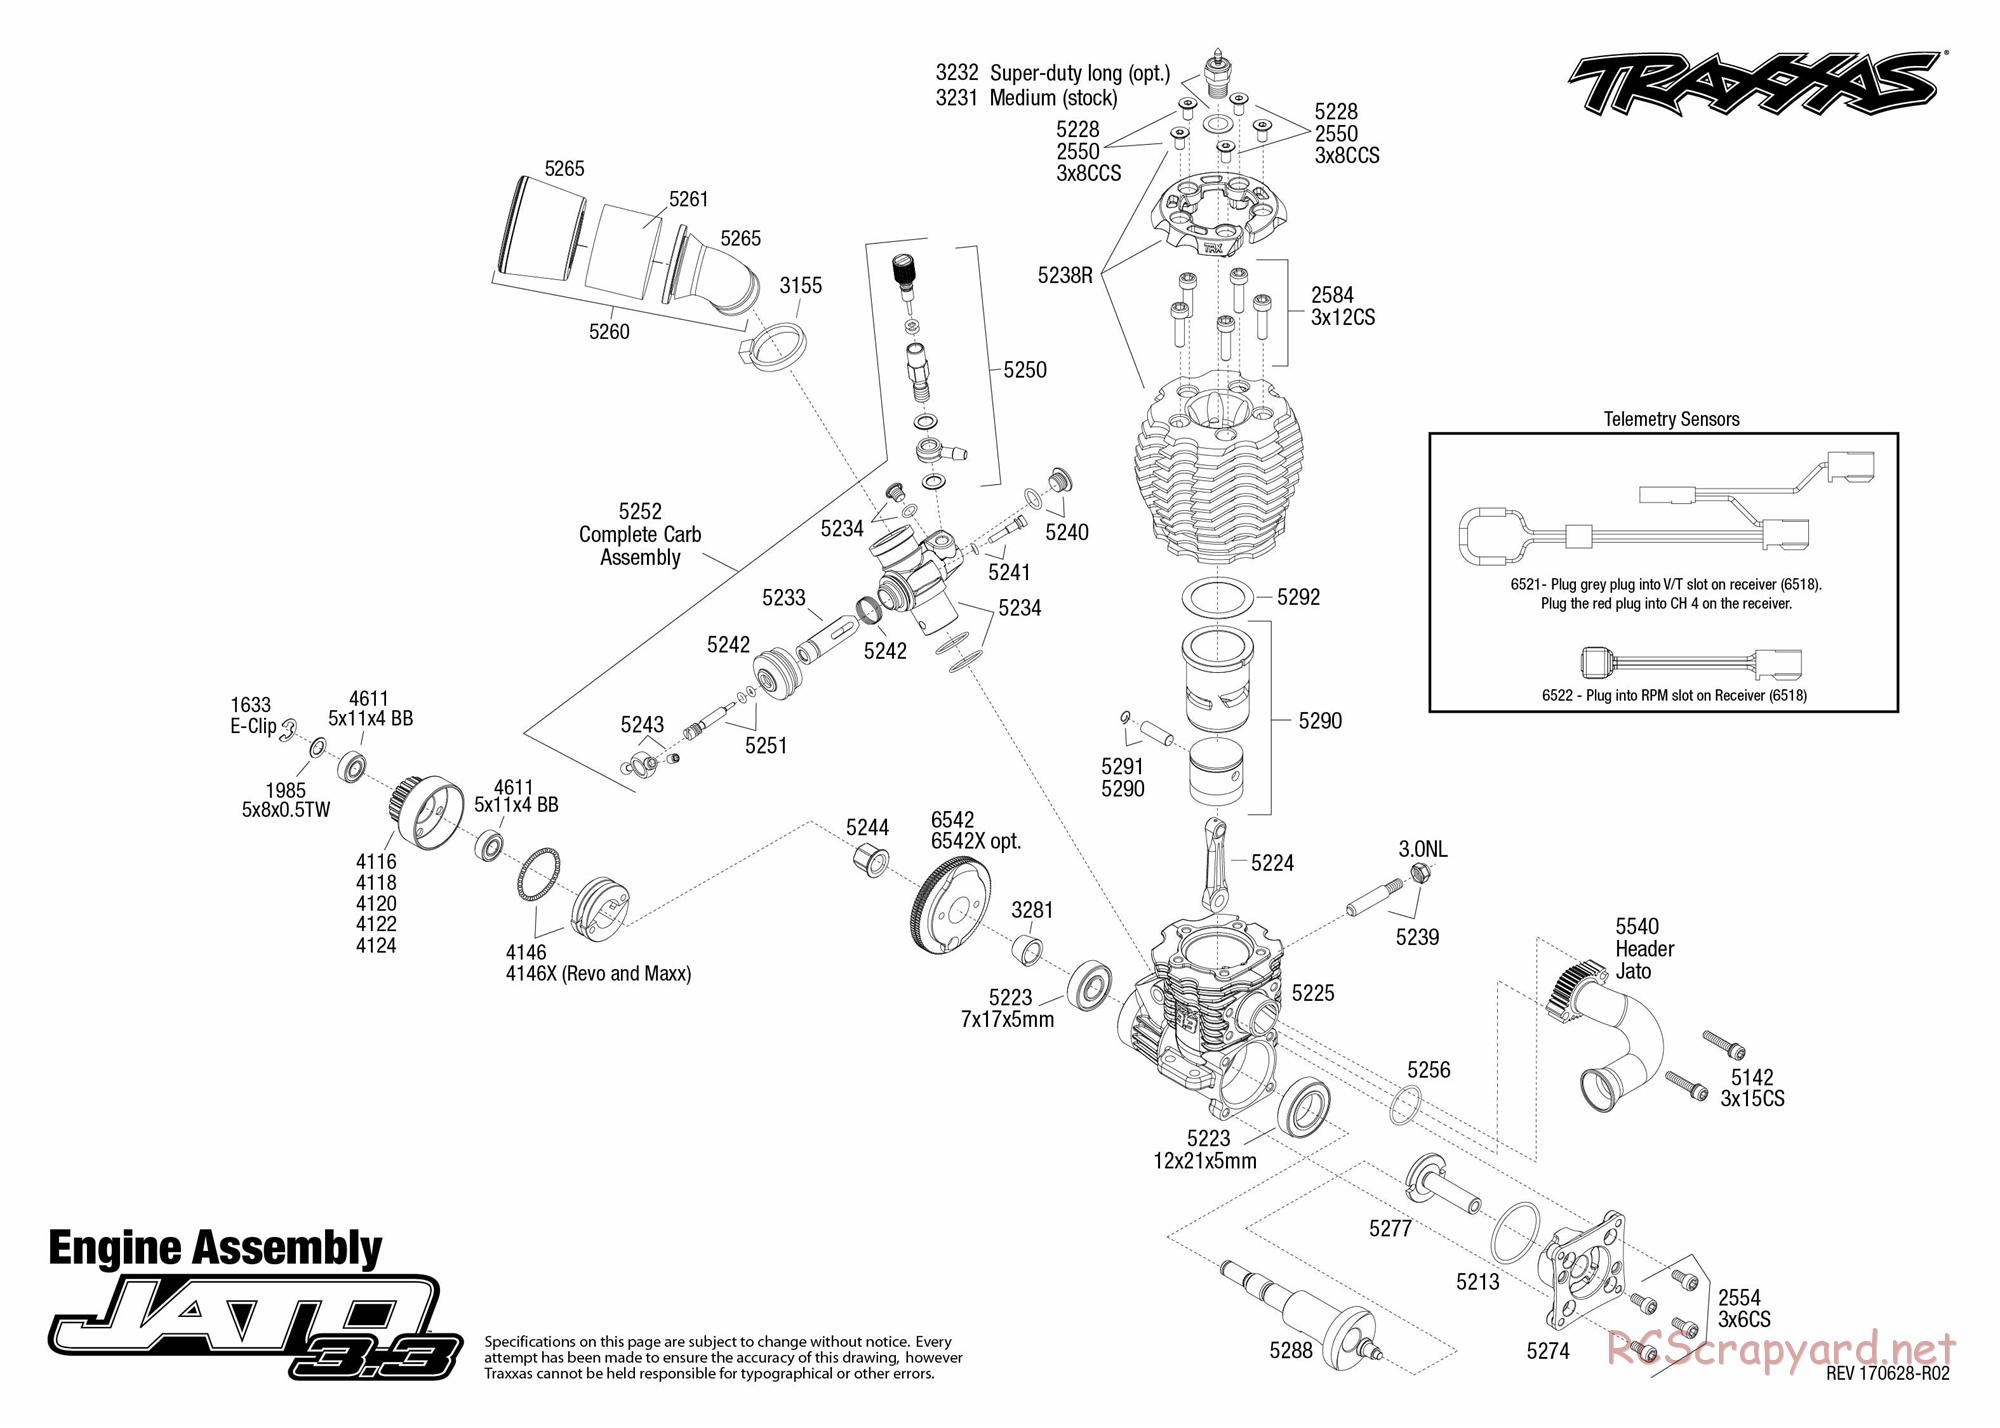 Traxxas - Jato 3.3 (2015) - Exploded Views - Page 2